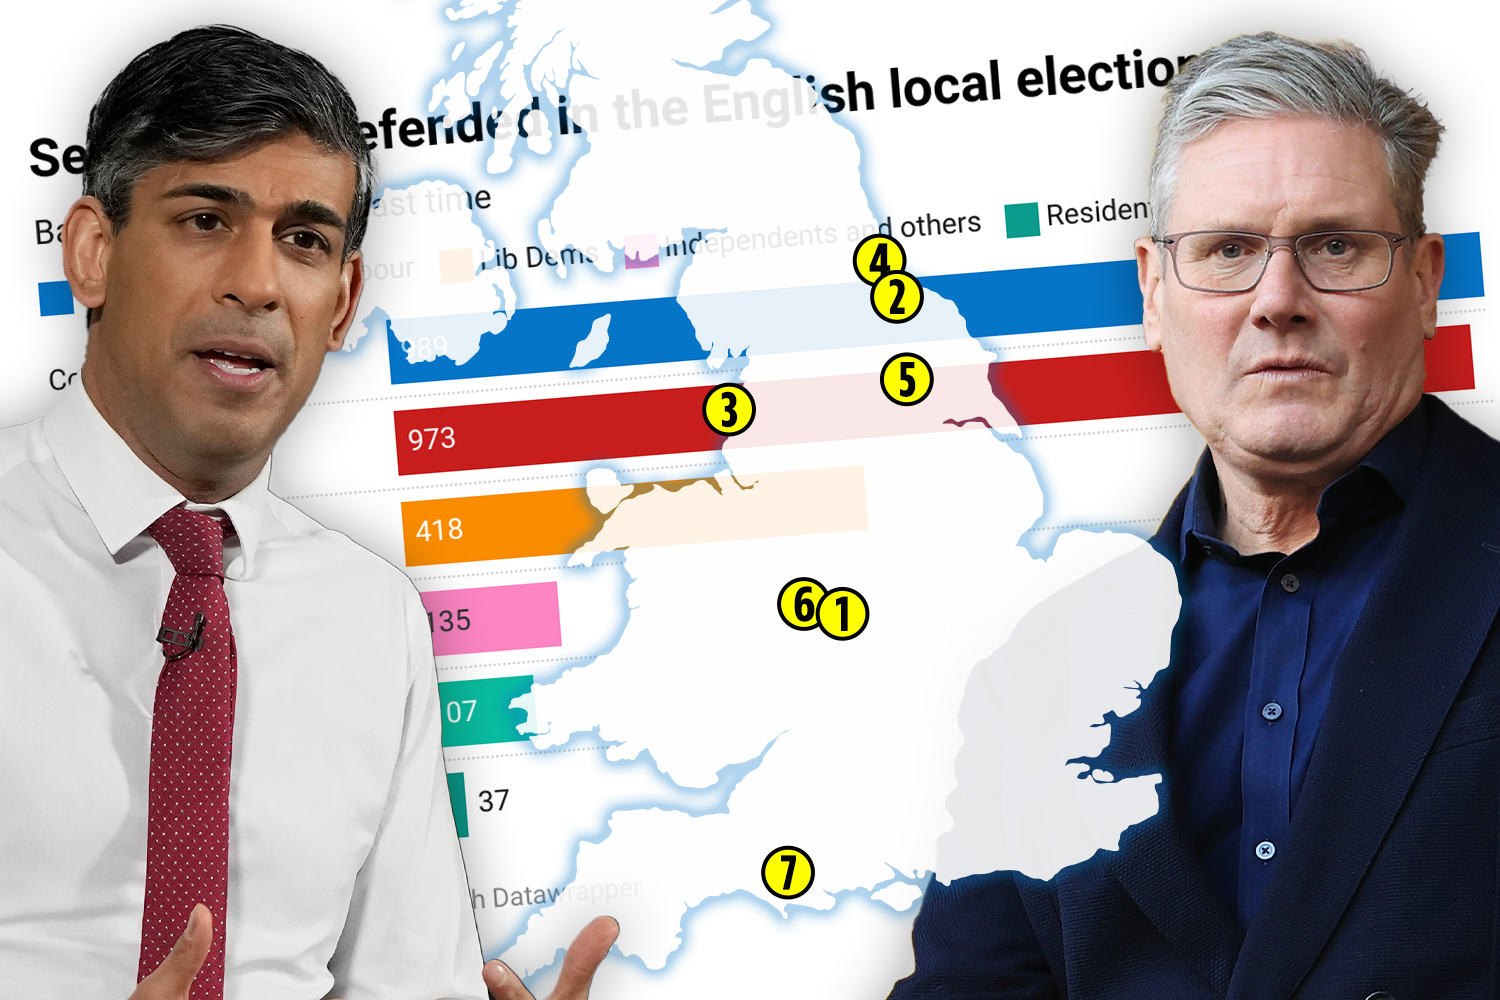 Local elections is last chance for Tories to close gap on Labour – here’s a run-down of key battleground contests [Video]